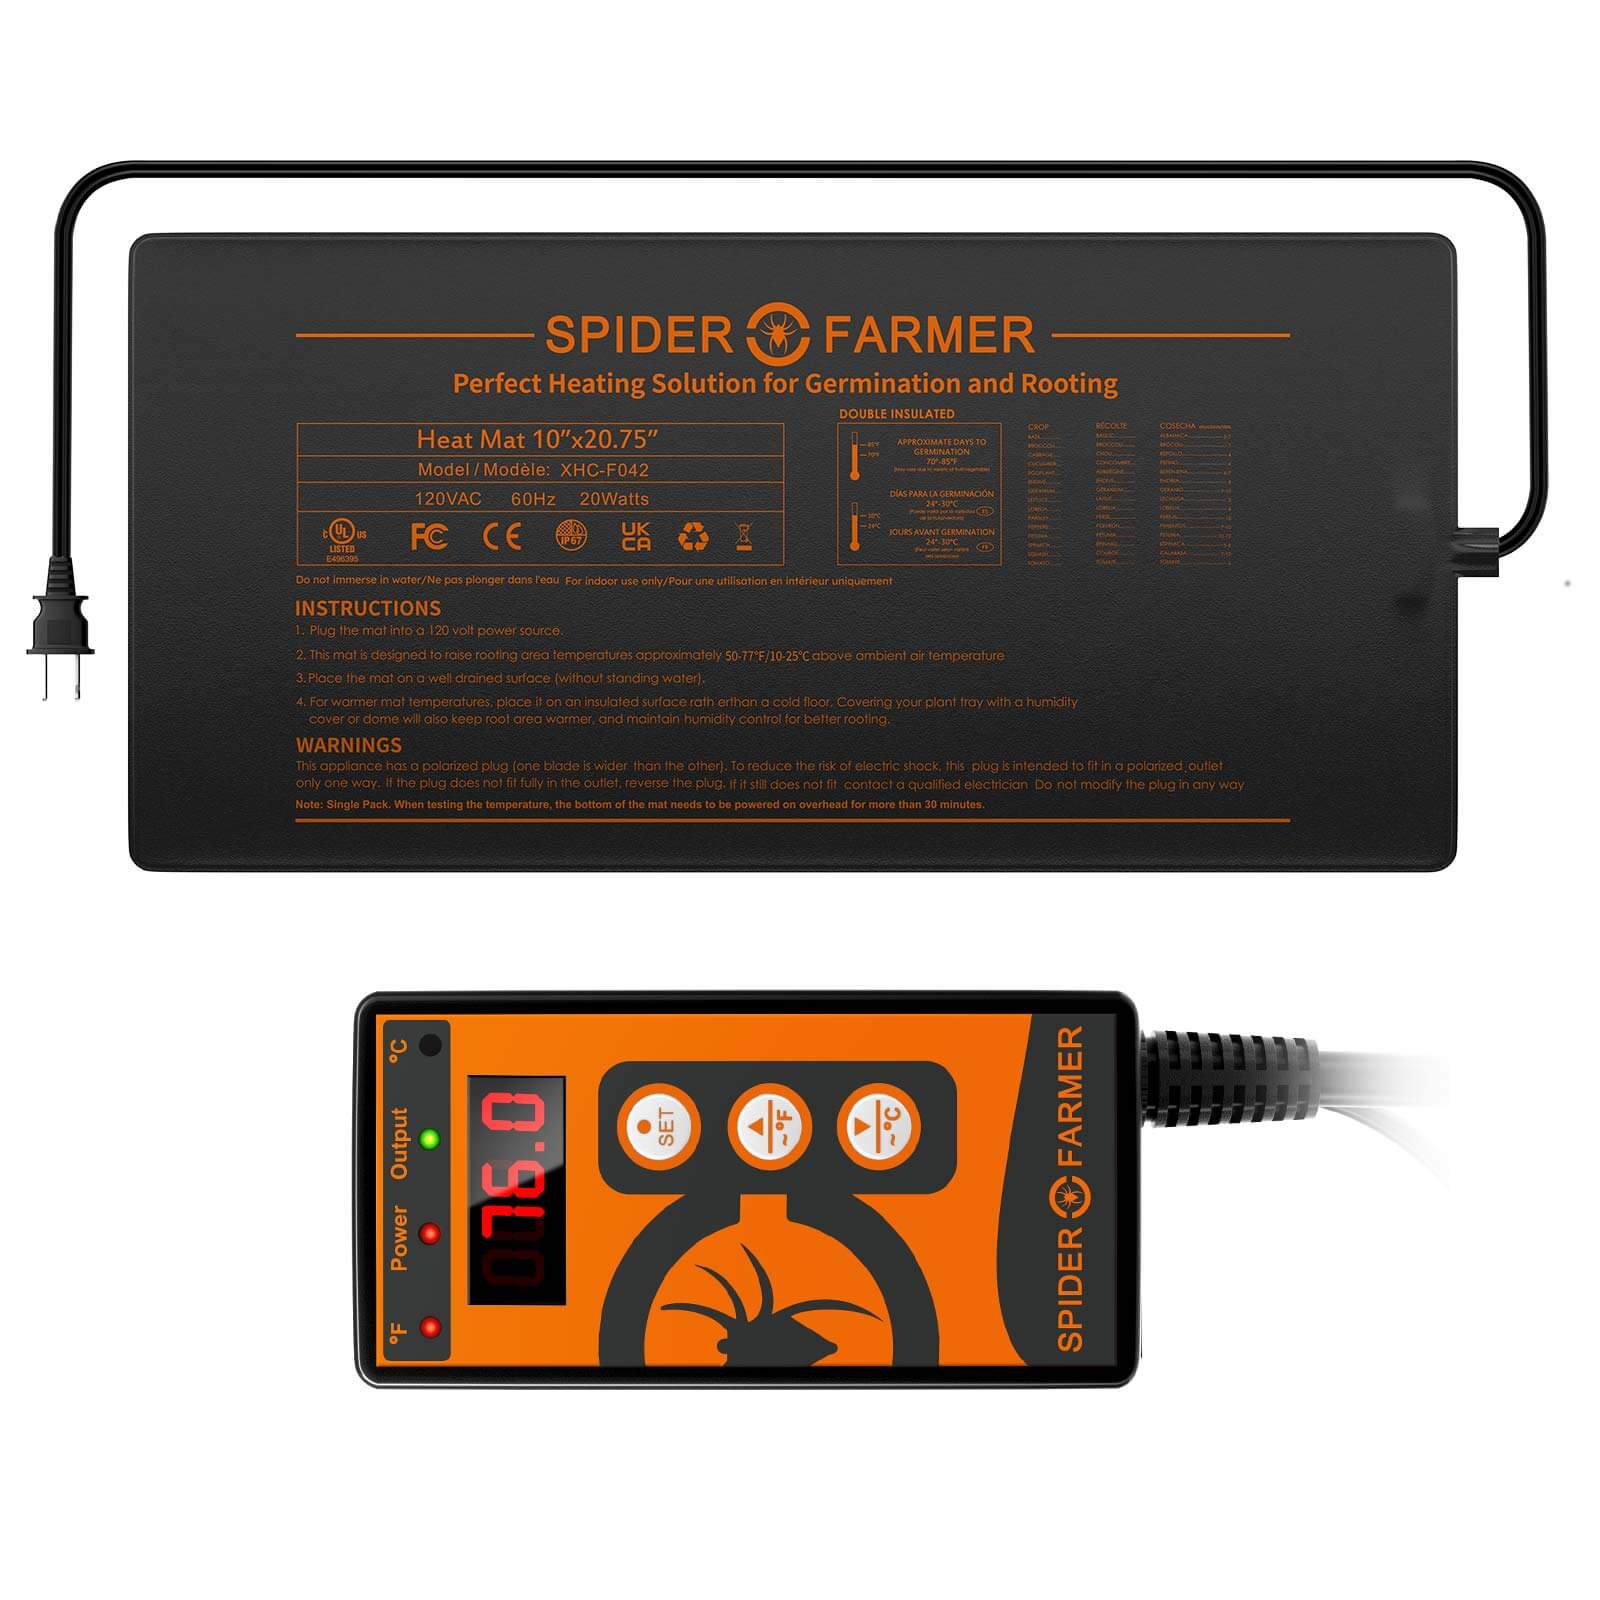 Help your seedlings flourish with the Spider Farmer 10” x 20.75” Seedling Heat Mat & Controller Set